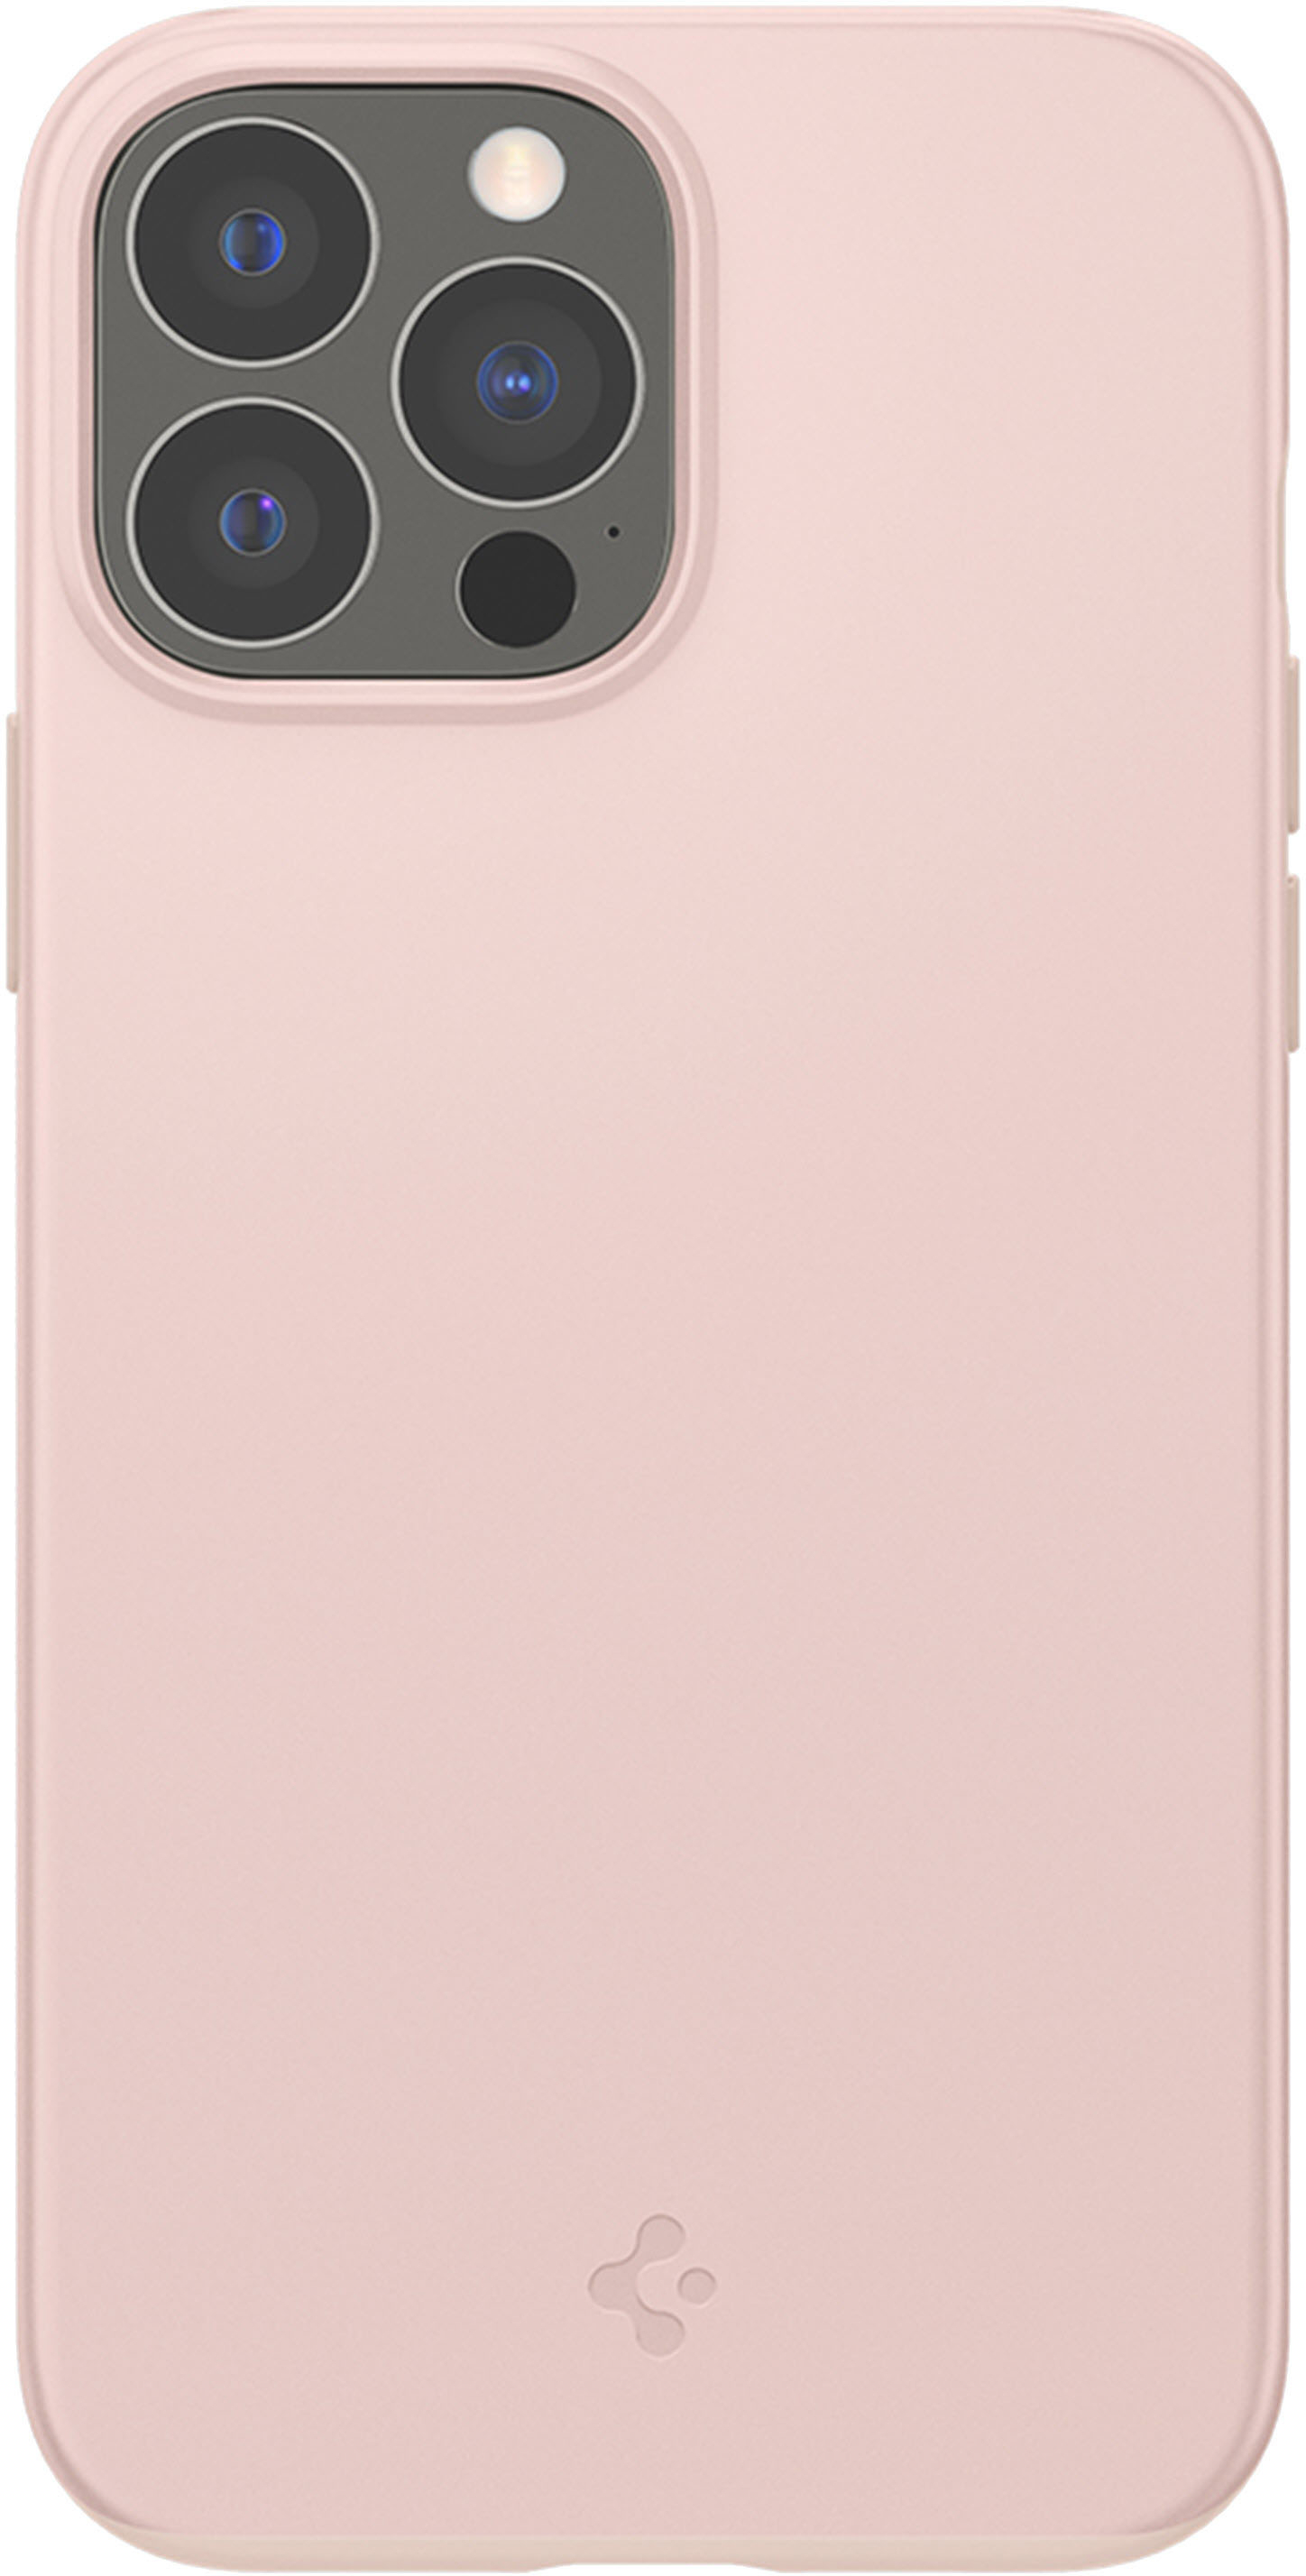 Spigen Thin Fit Hard Shell Case For Apple Iphone 13 Pro Max Iphone 12 Pro Max Pink Sand 553bbr Best Buy